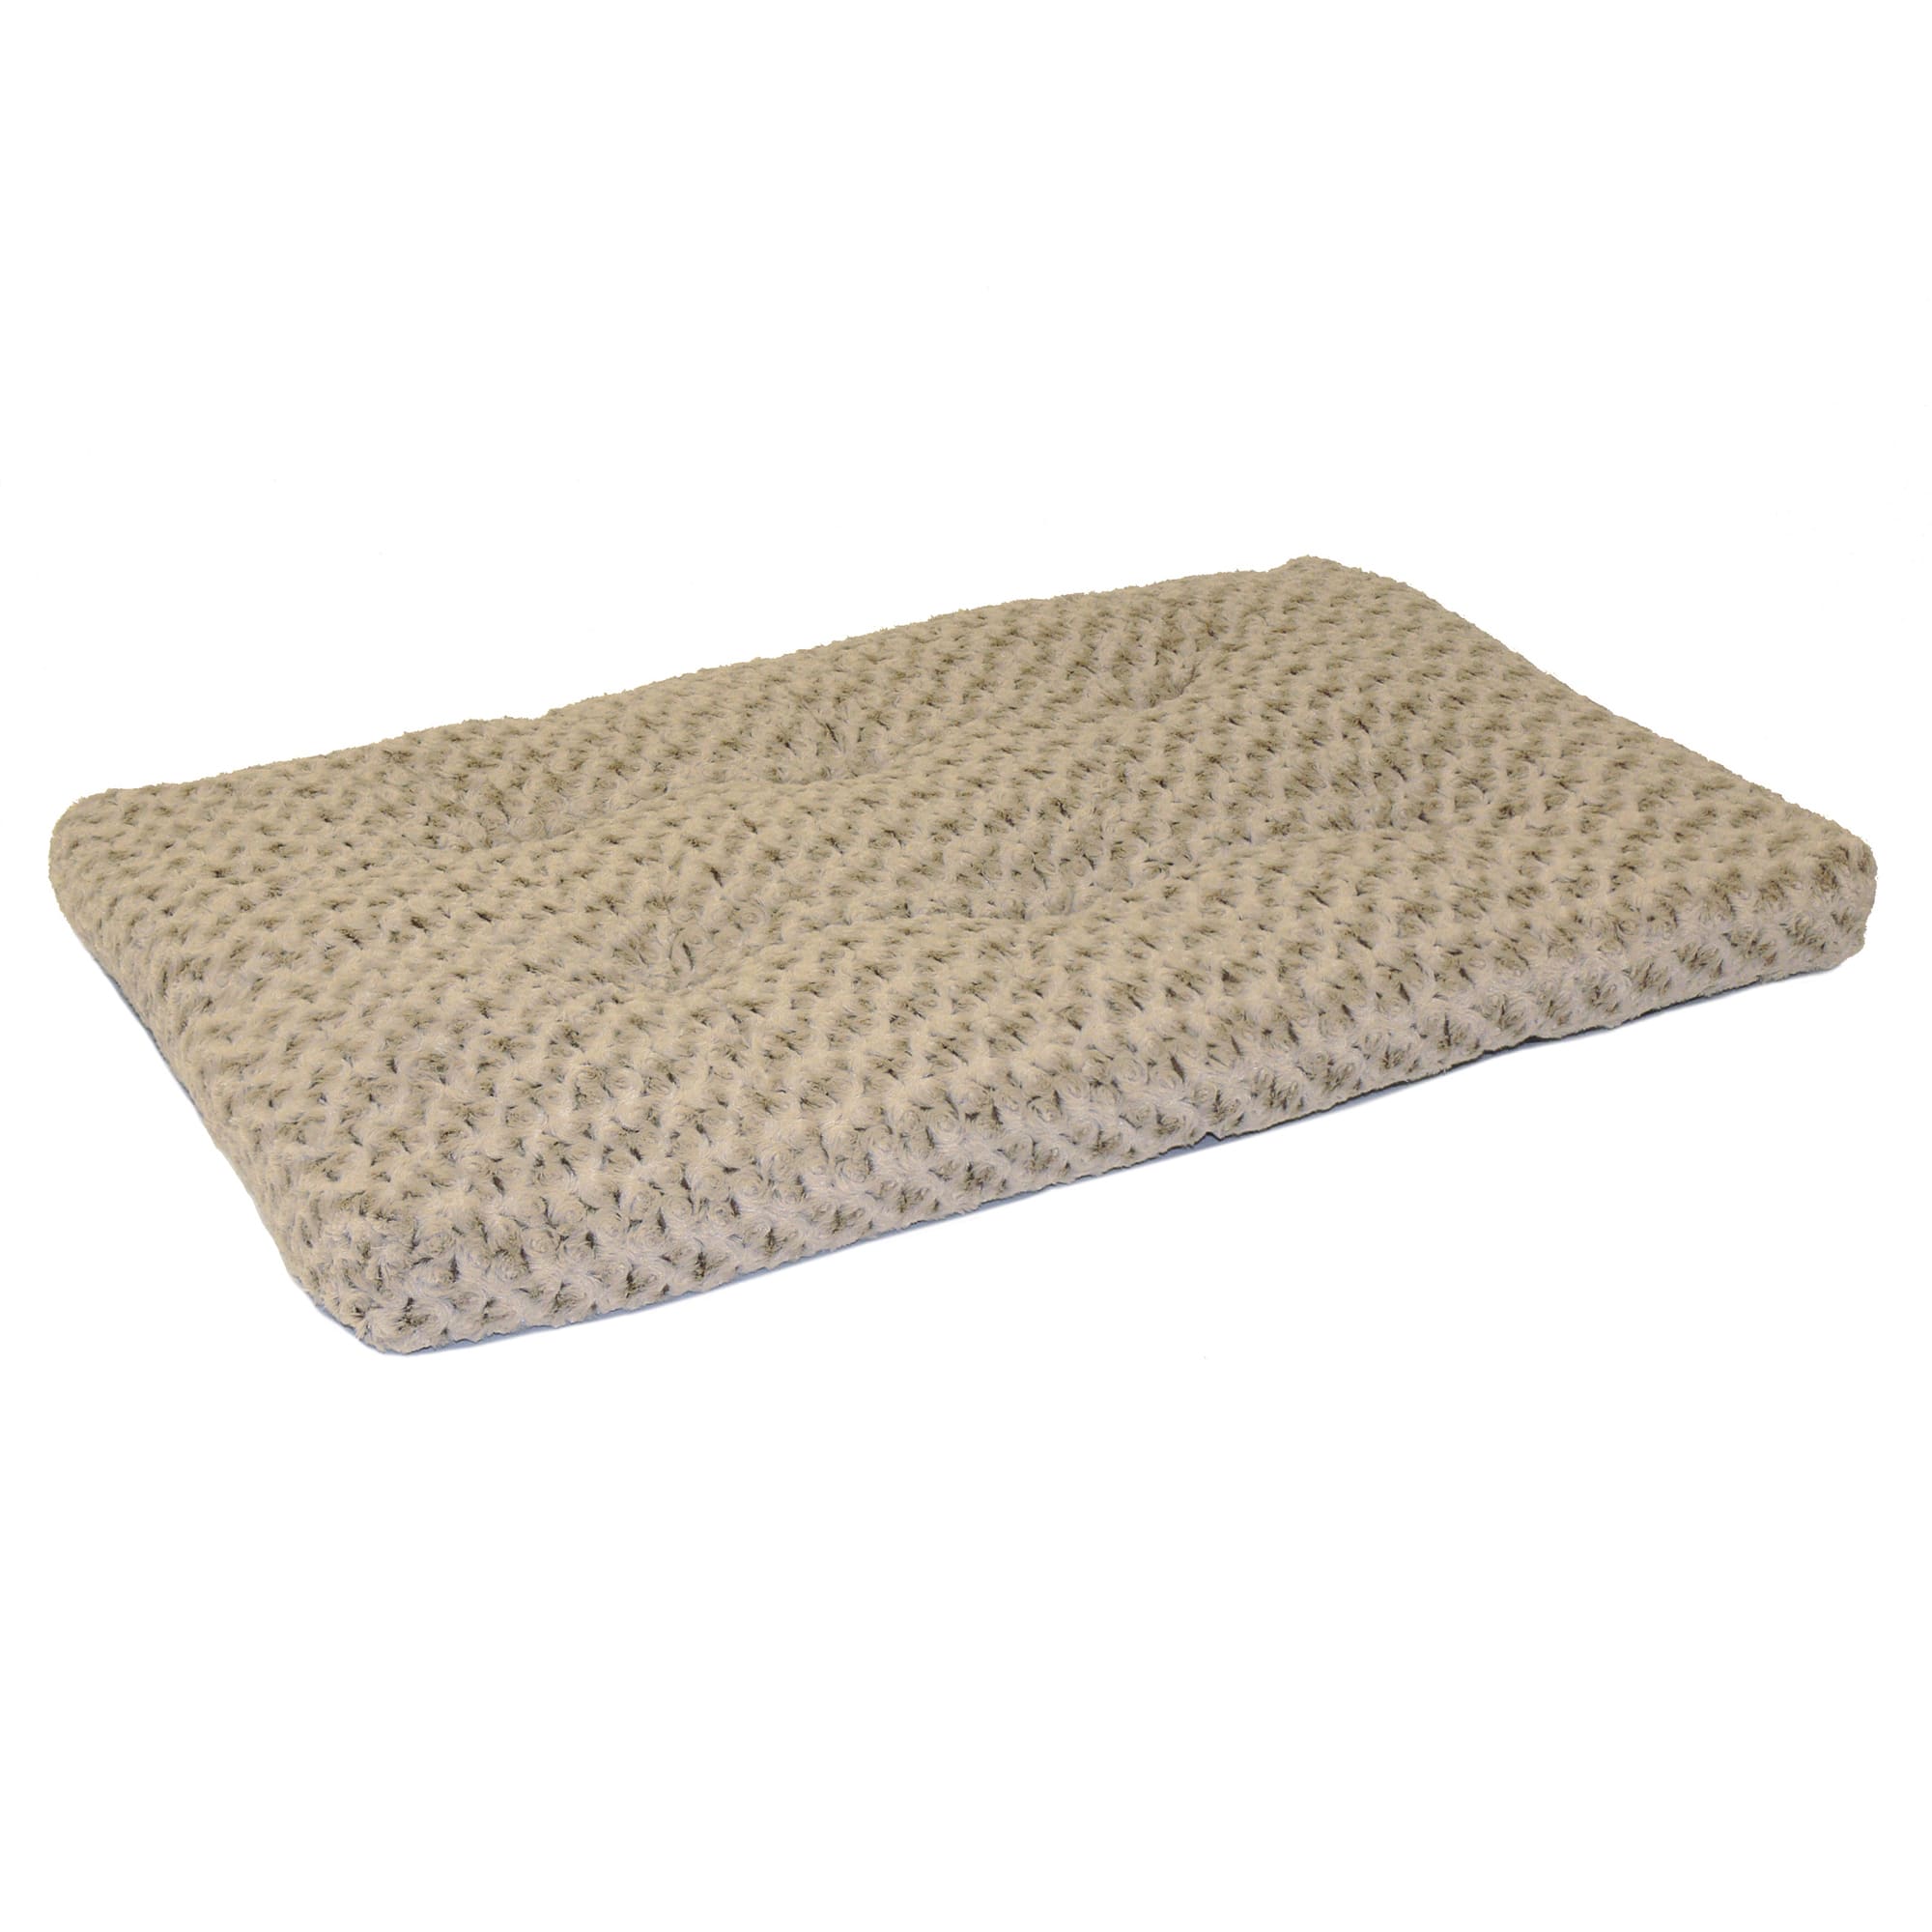 Photos - Dog Bed / Basket Midwest Quiet Time Ombre Taupe Dog Bed, 46" L X 28" W, XX-Large, B 